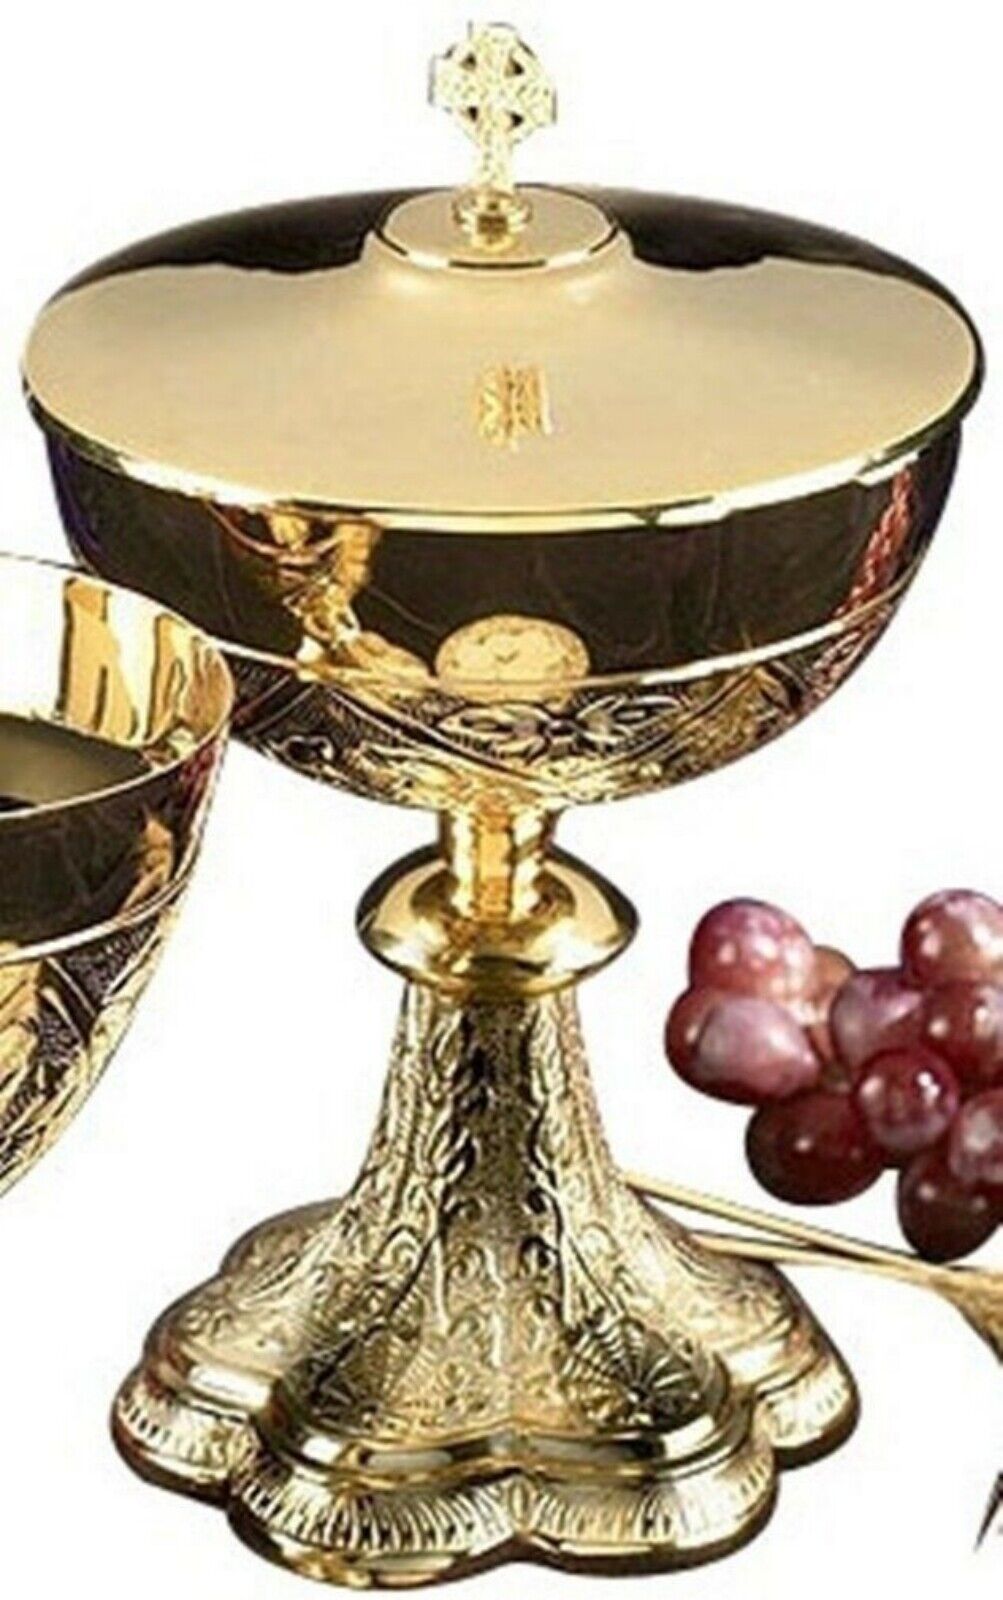 Gold Plated Vine Embossed Ciborium With Celtic Cross Handle Lid, 9 1/2 Inch N.G.